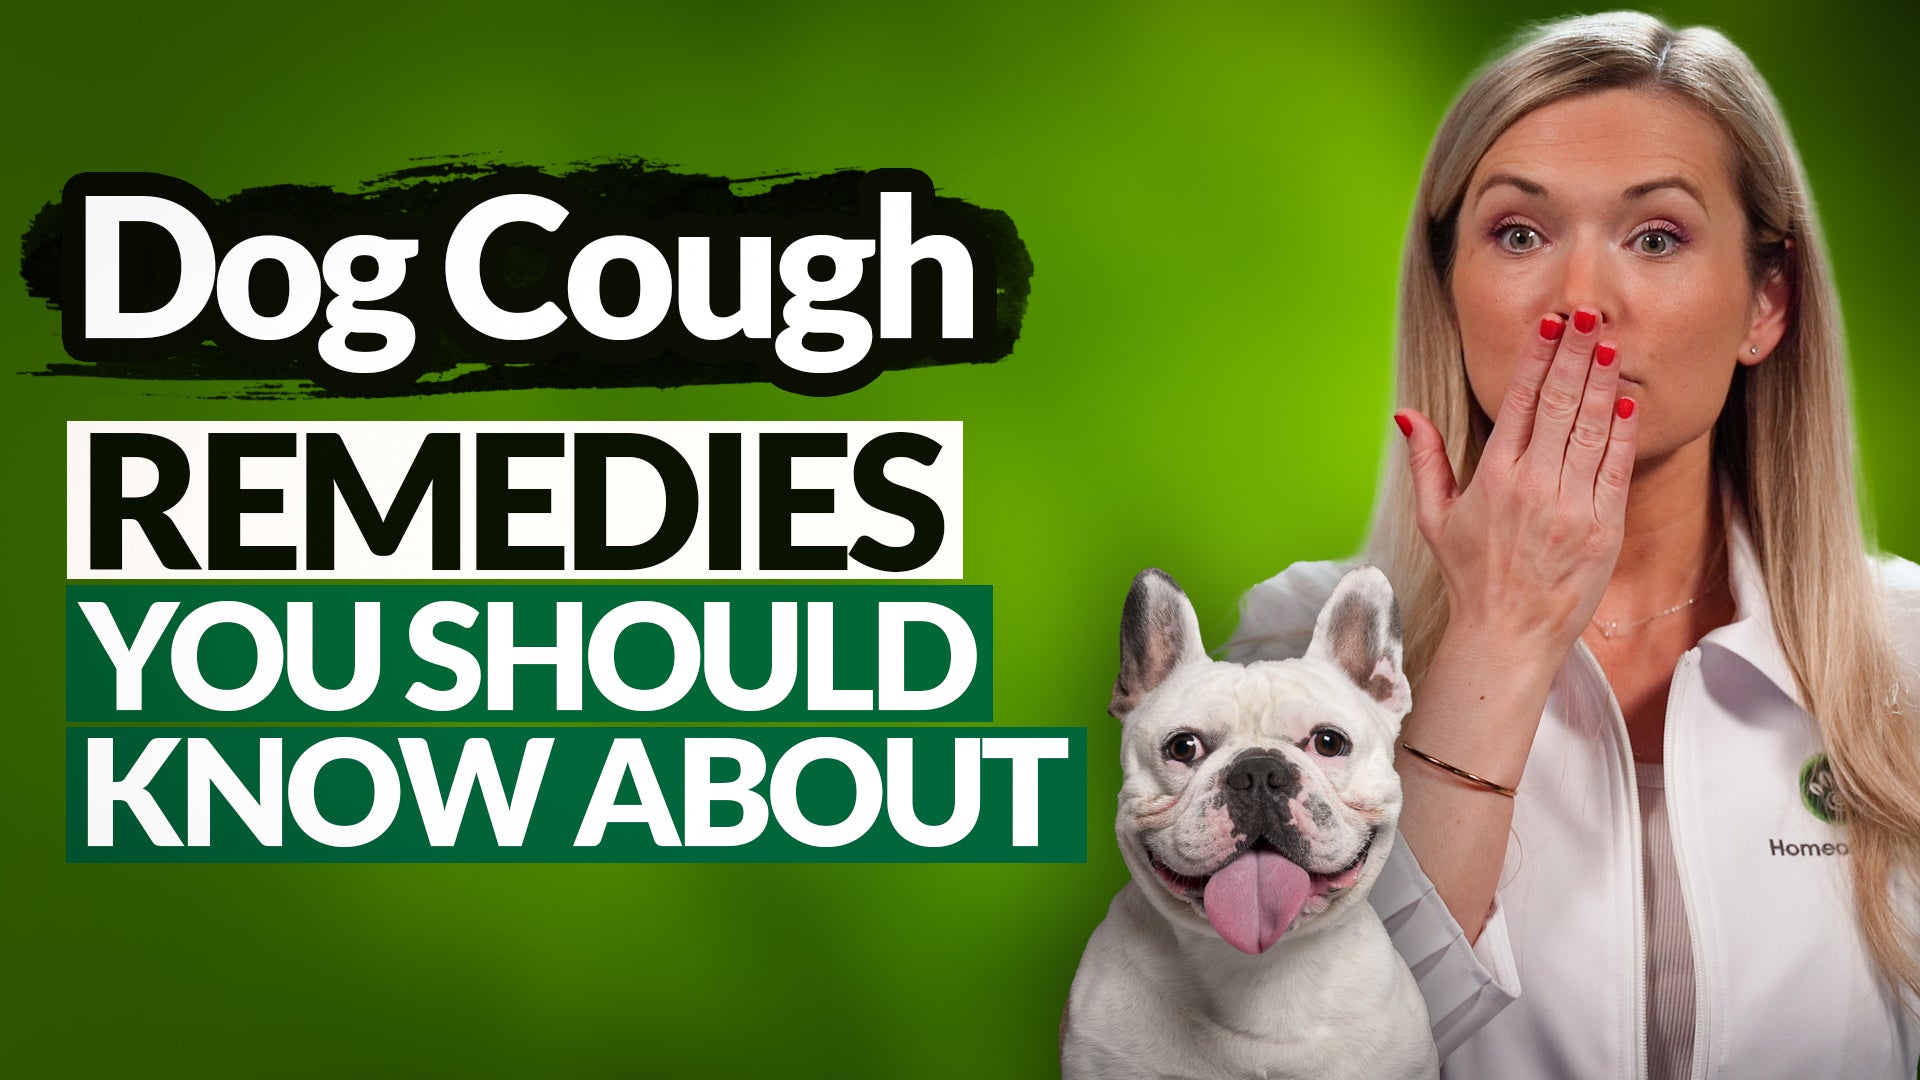 Hassle-Free And Natural Dog Home Cough Remedies - You’ve Got To Take Note Of These